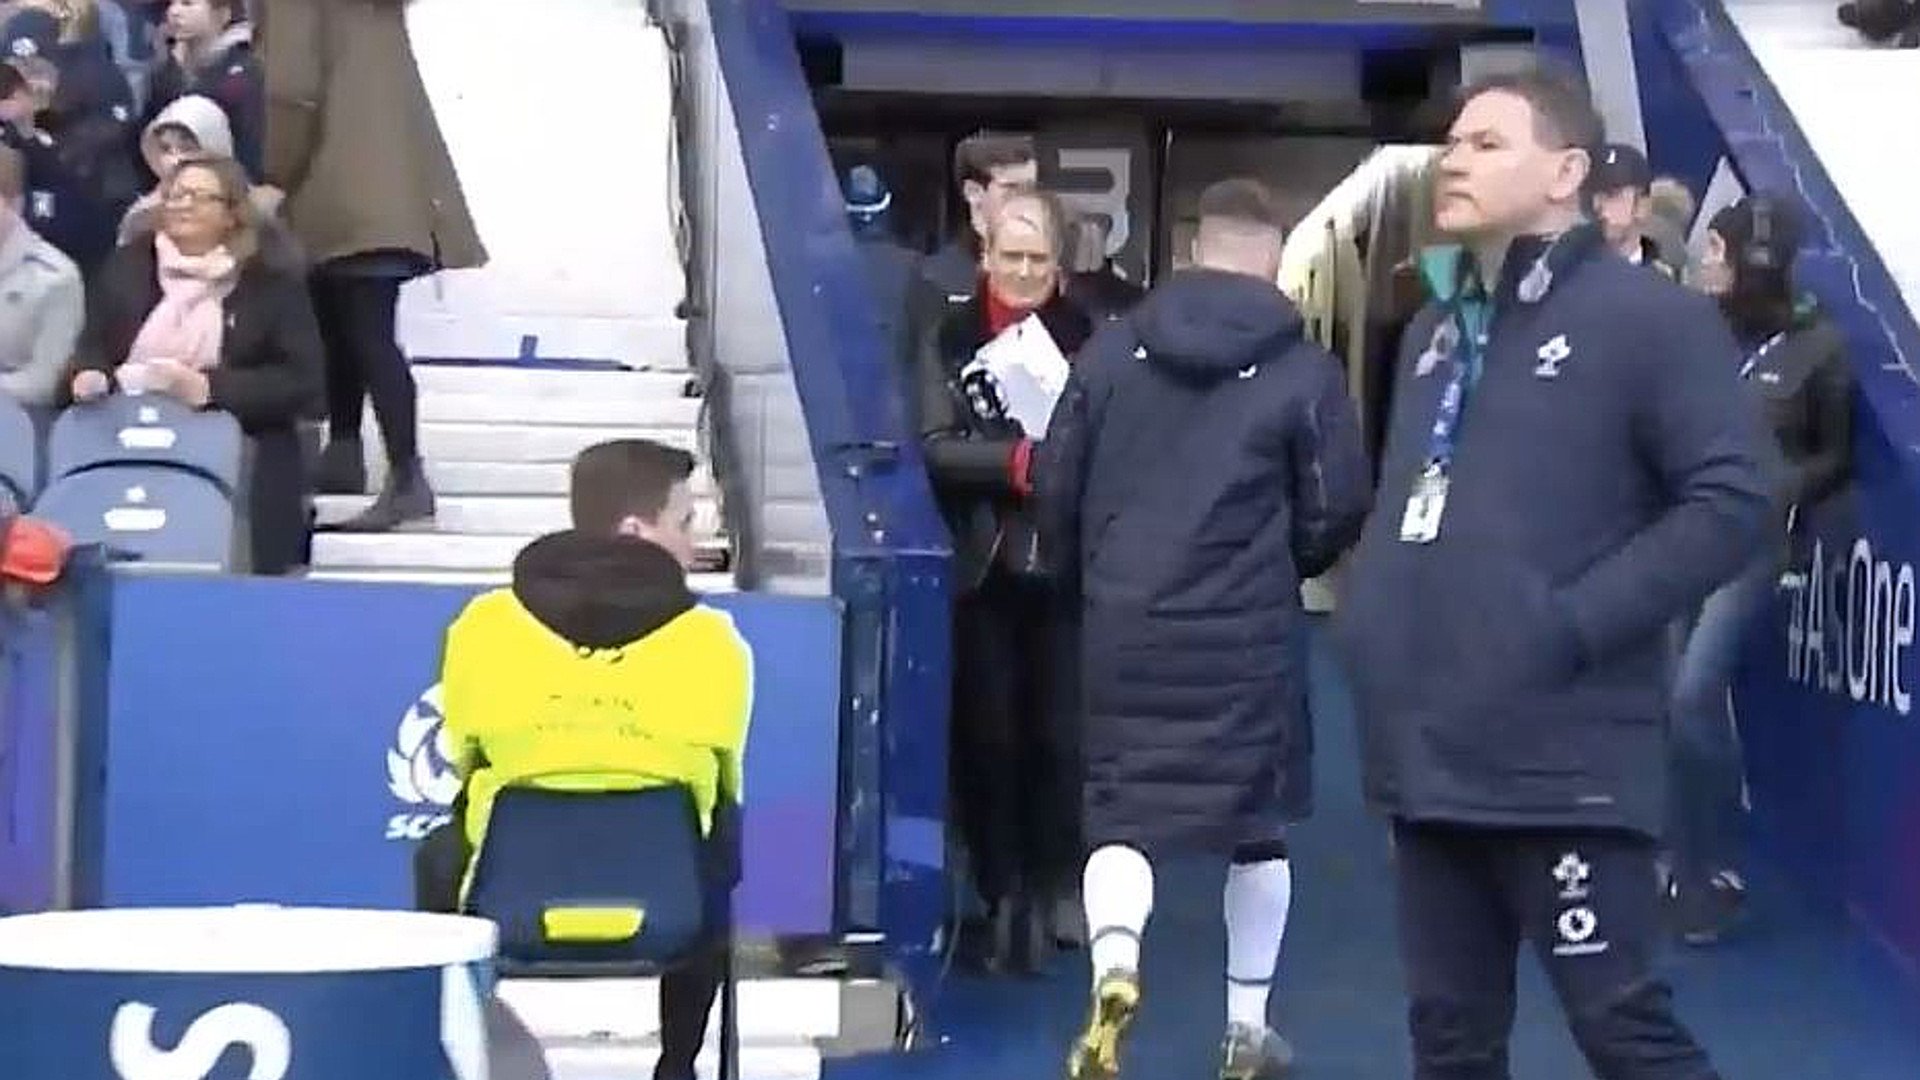 FOOTAGE: The shocking moment Stuart Hogg assaults an advertising board and calmly walks off